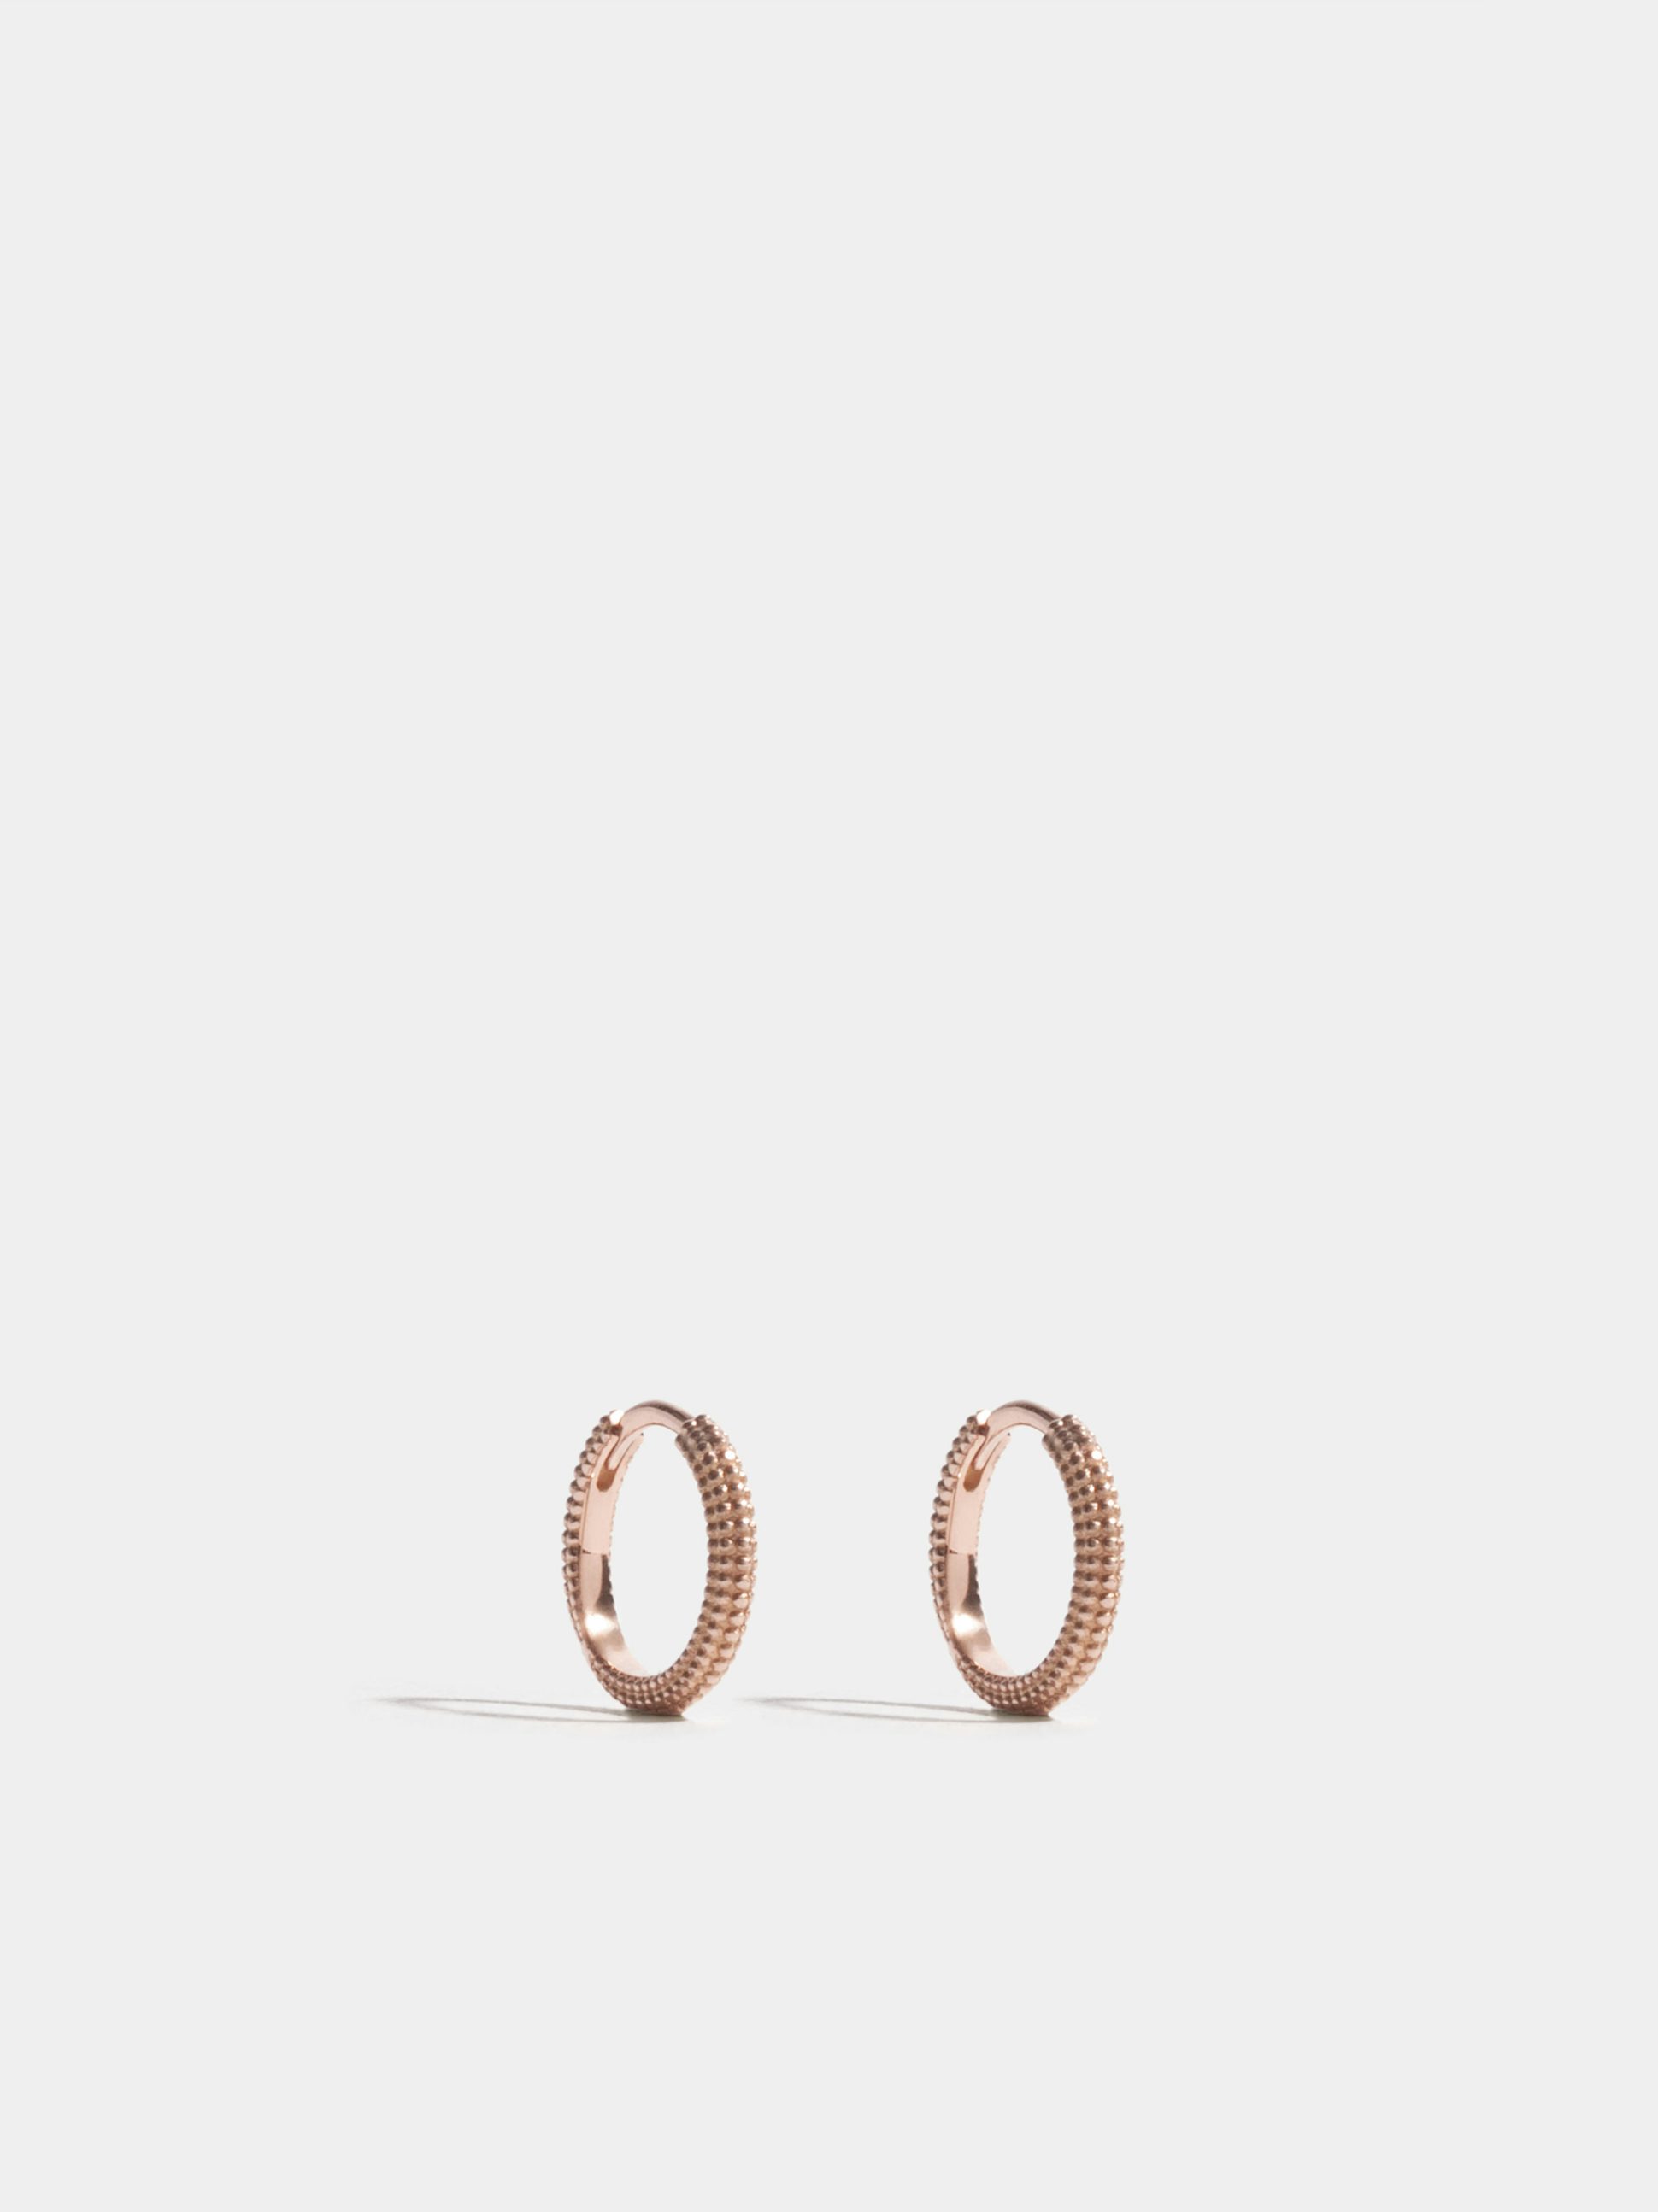 Anagramme "millegrains" earrings in 18k Fairmined ethical yellow gold